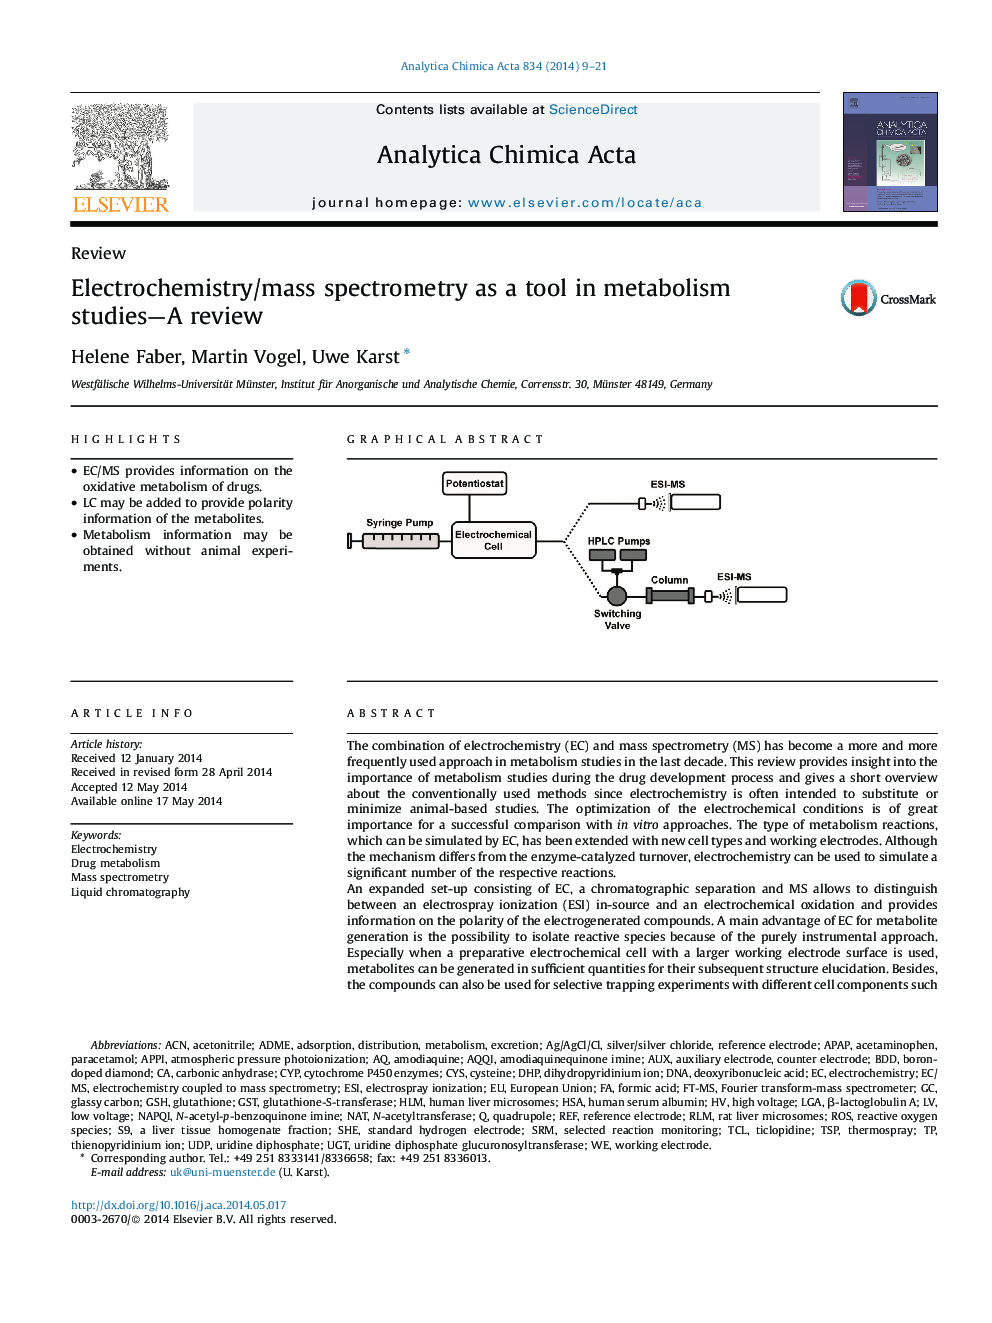 Electrochemistry/mass spectrometry as a tool in metabolism studies—A review